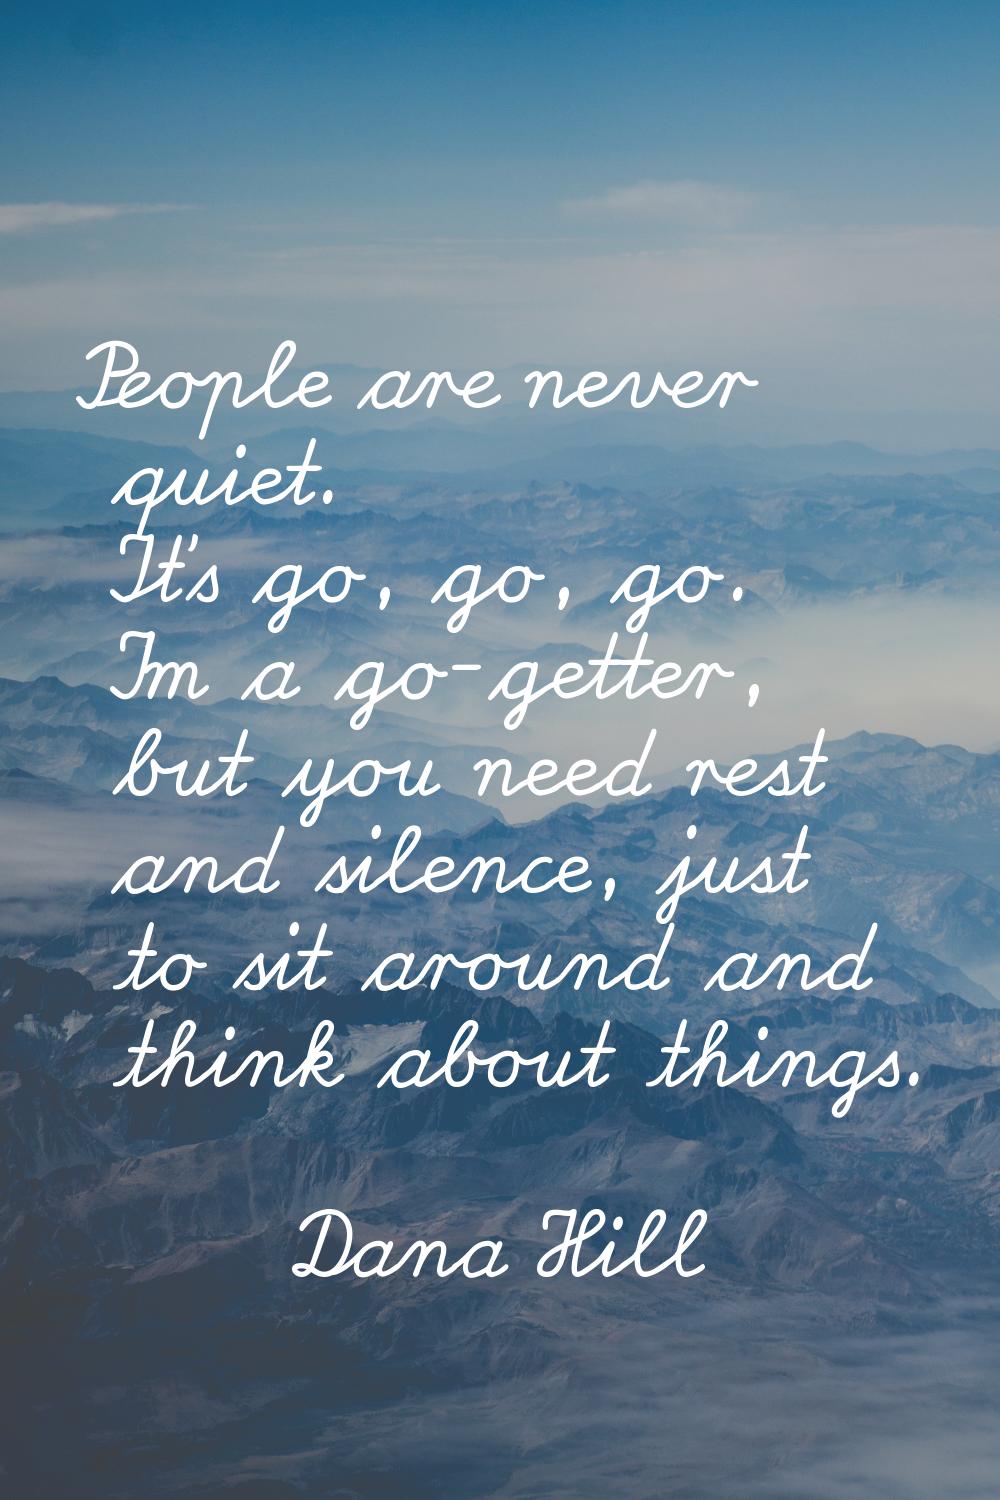 People are never quiet. It's go, go, go. I'm a go-getter, but you need rest and silence, just to si